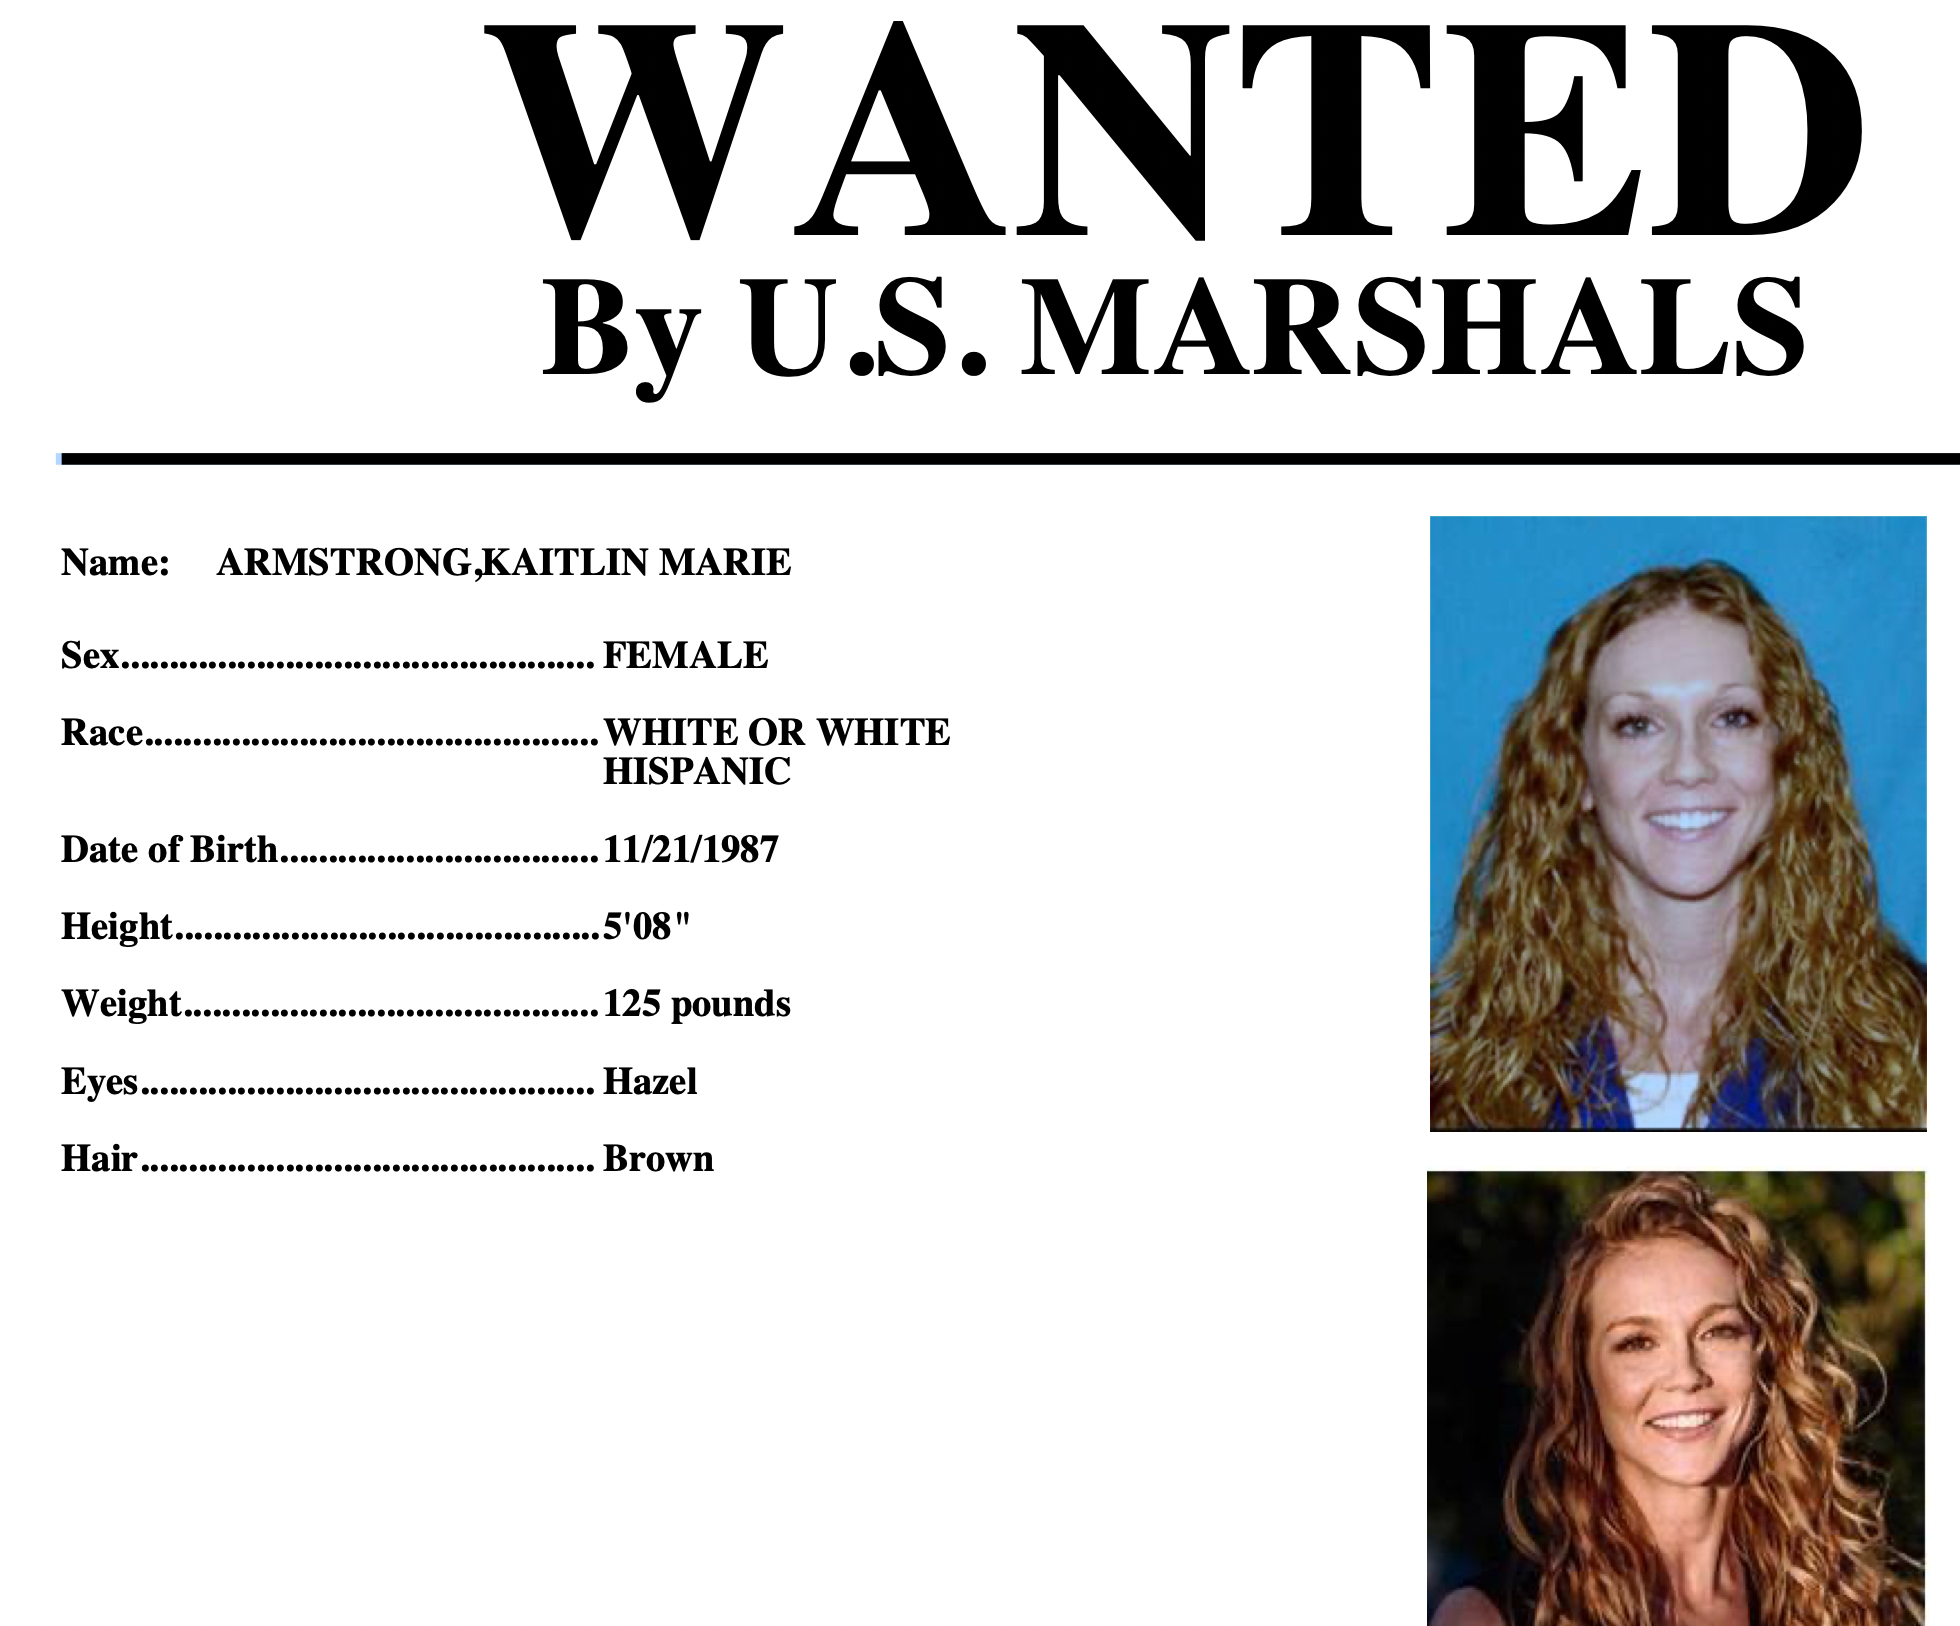 A wanted poster for Kaitlin Armstrong, who has been arrested in Costa Rica